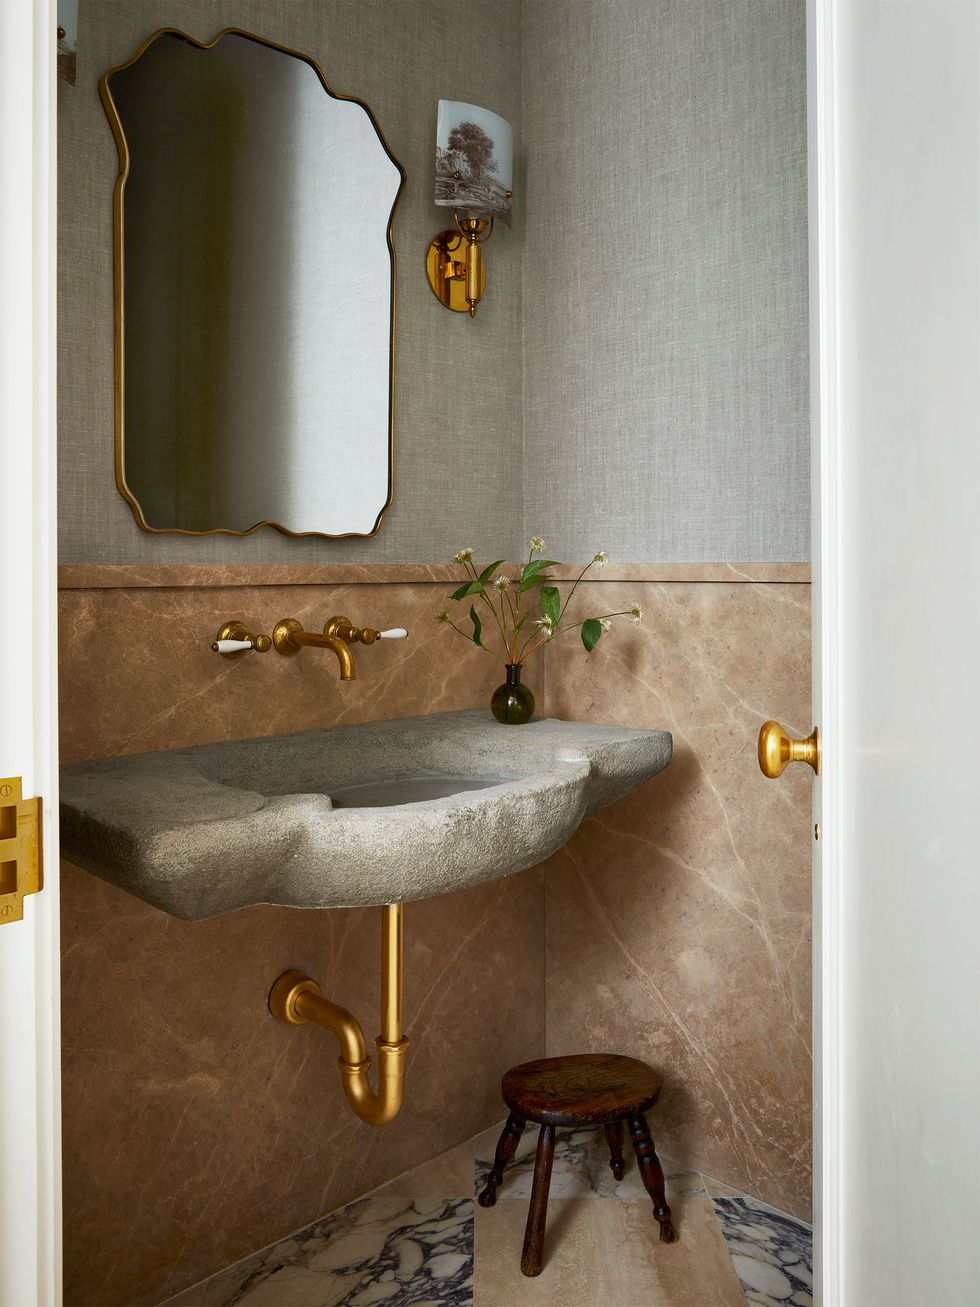 a powder room has a marble floor and travertine on the bottom half of walls with wallpaper on upper half, a small wooden stool, a stone sink with copper fittings, antique tile sconces, and a wavy edged mirror